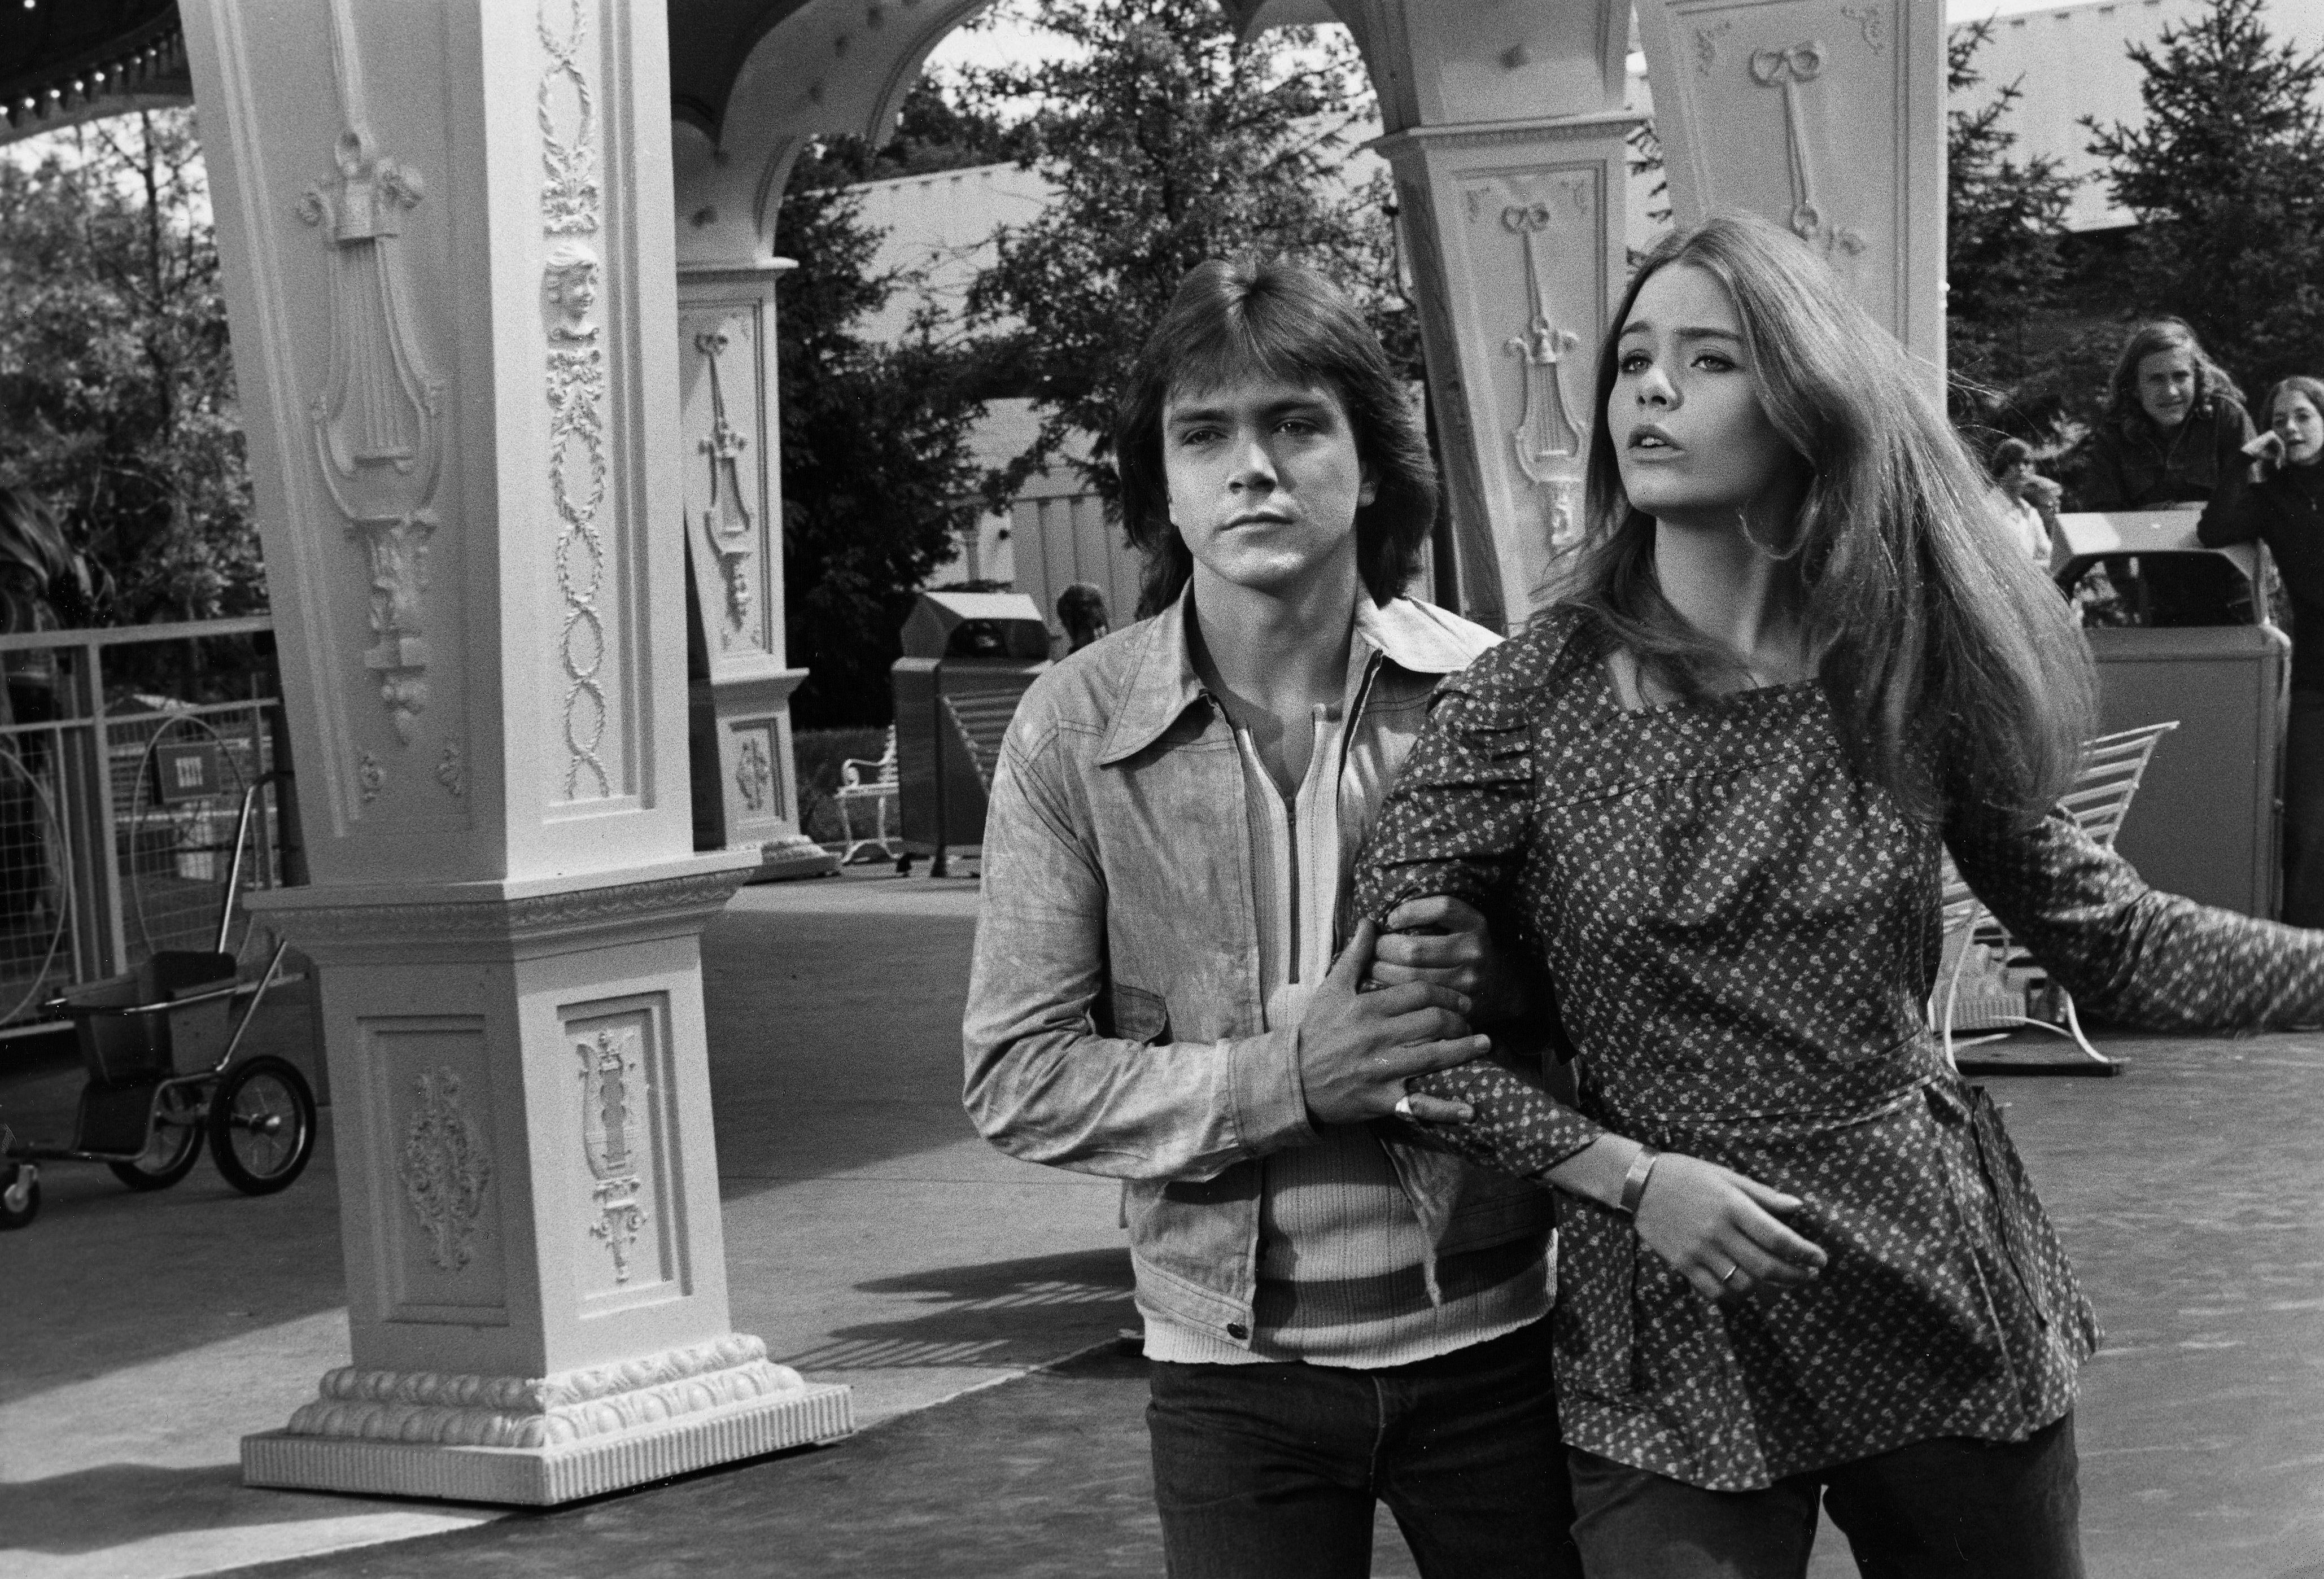 David Cassidy, Susan Dey in "THE PARTRIDGE FAMILY." | Source: Getty Images